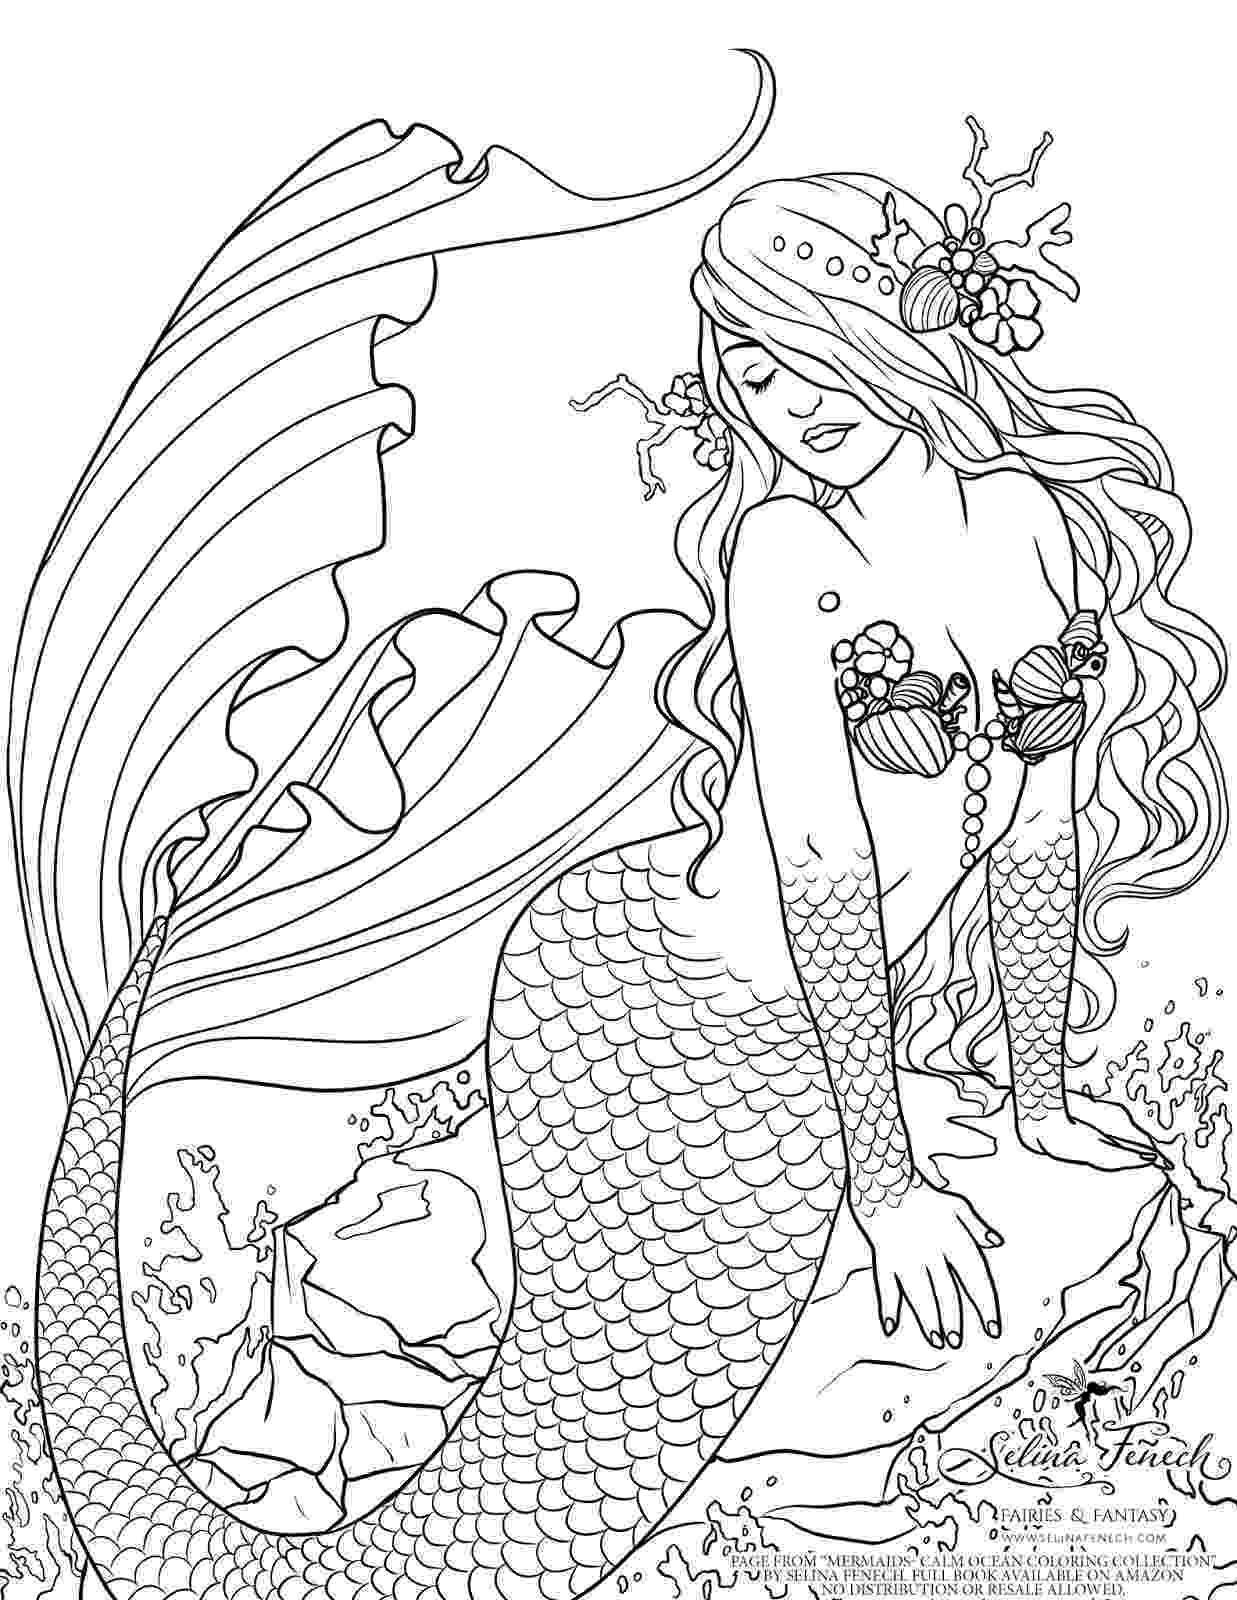 mermaid coloring pages for adults mermaid coloring pages for adults best coloring pages for adults pages mermaid coloring 